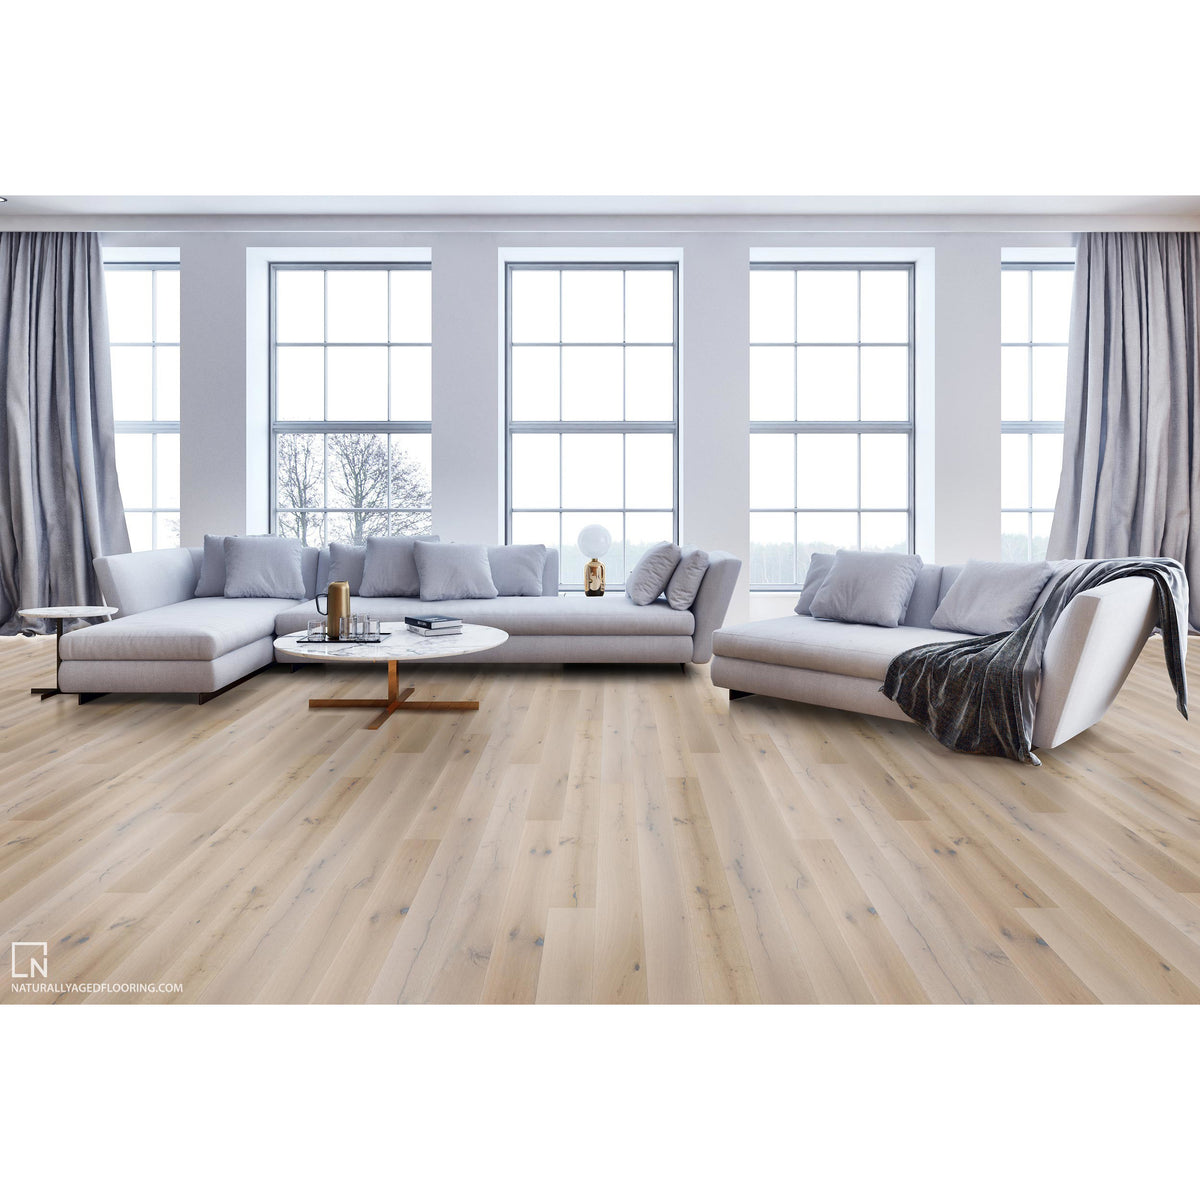 Naturally Aged Flooring - Pinnacle Collection - Zenith Room Scene